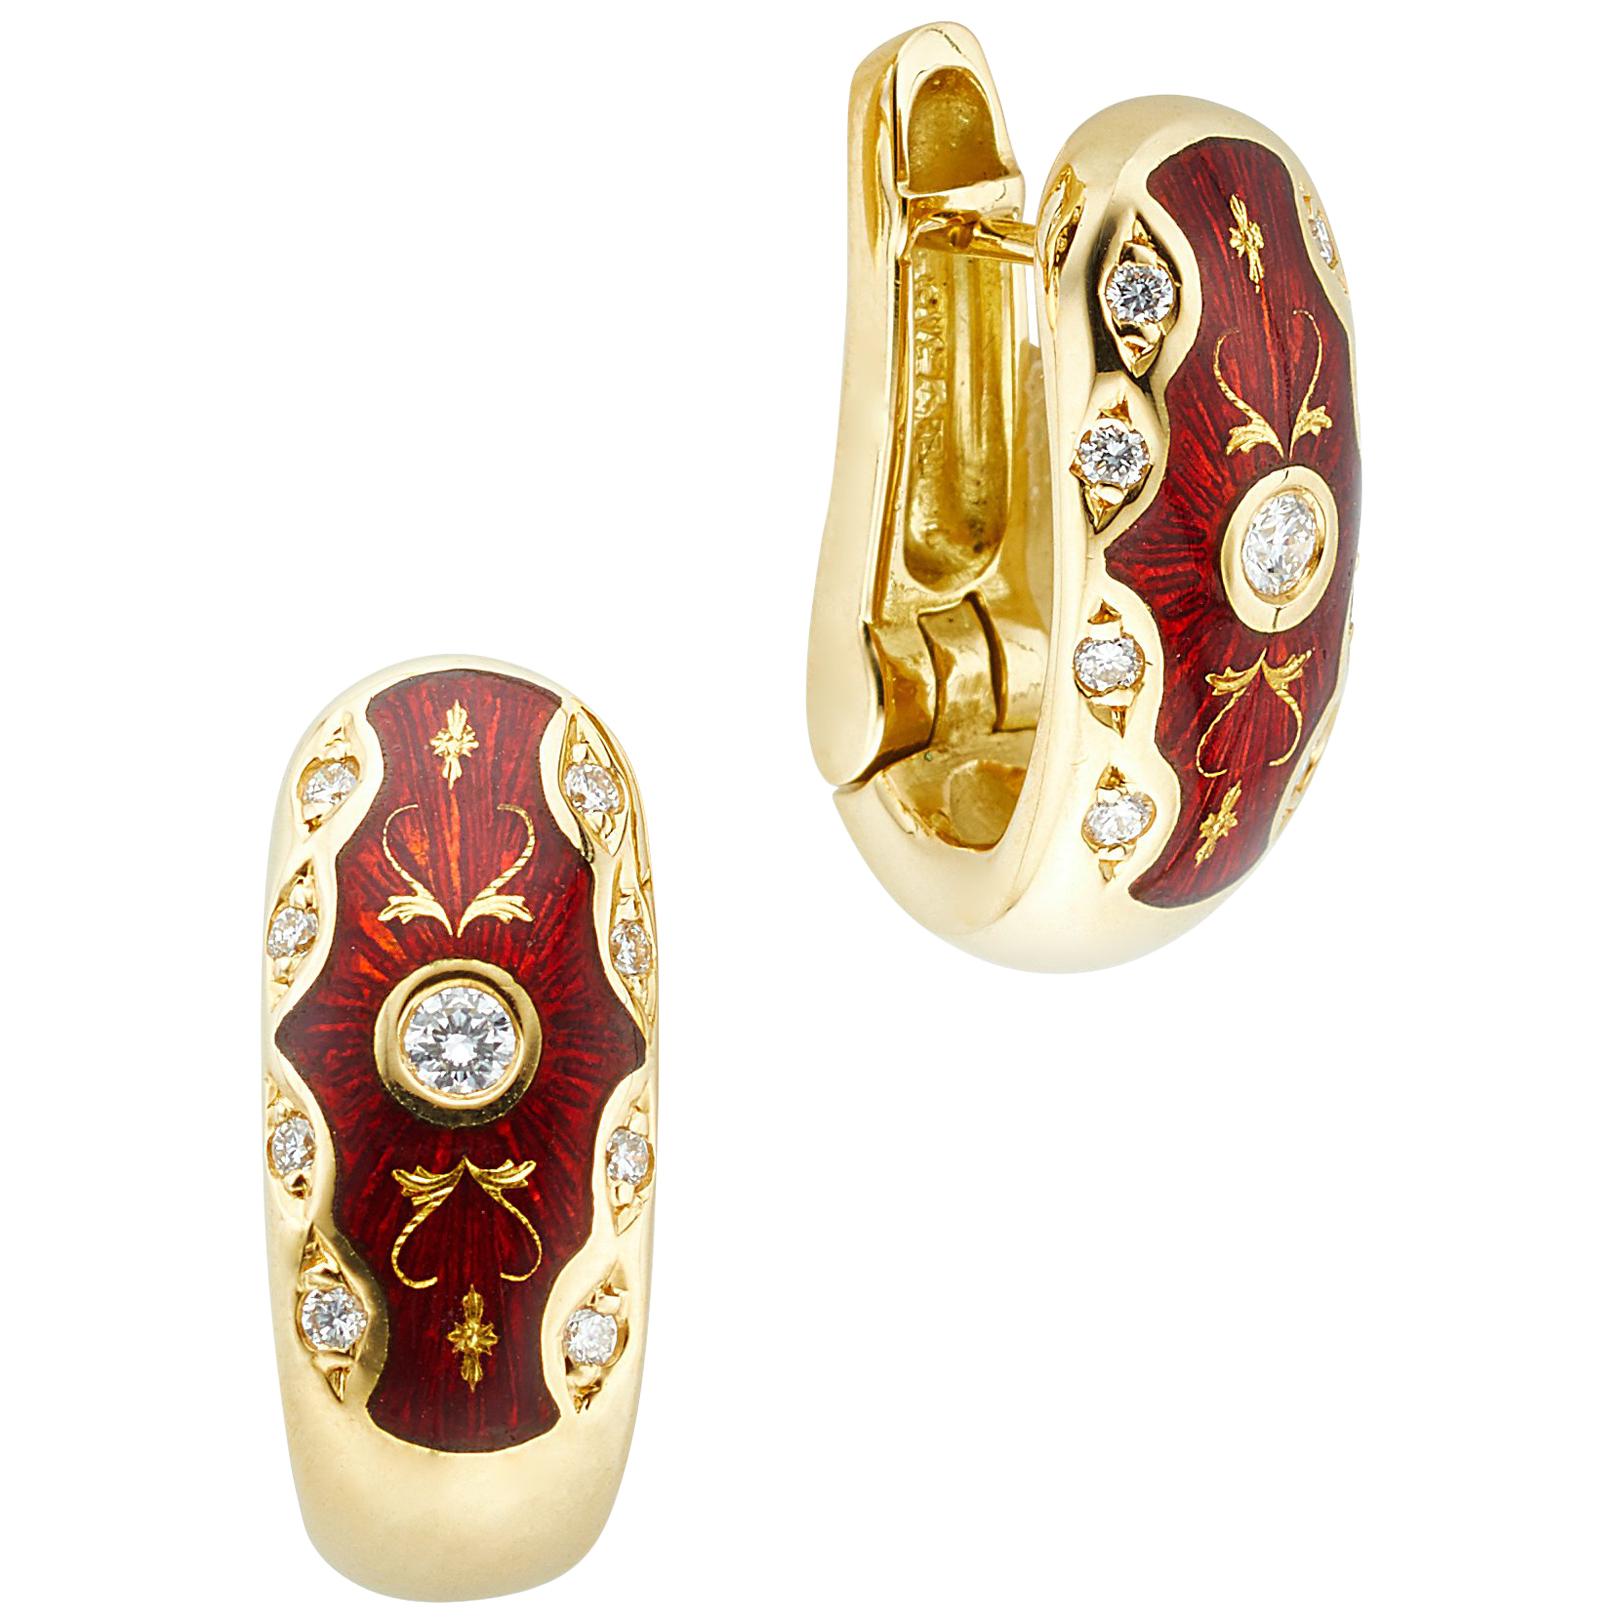 Faberge Victor Mayer Collection 18 Karat Gold Red Enamel and Diamond Earrings